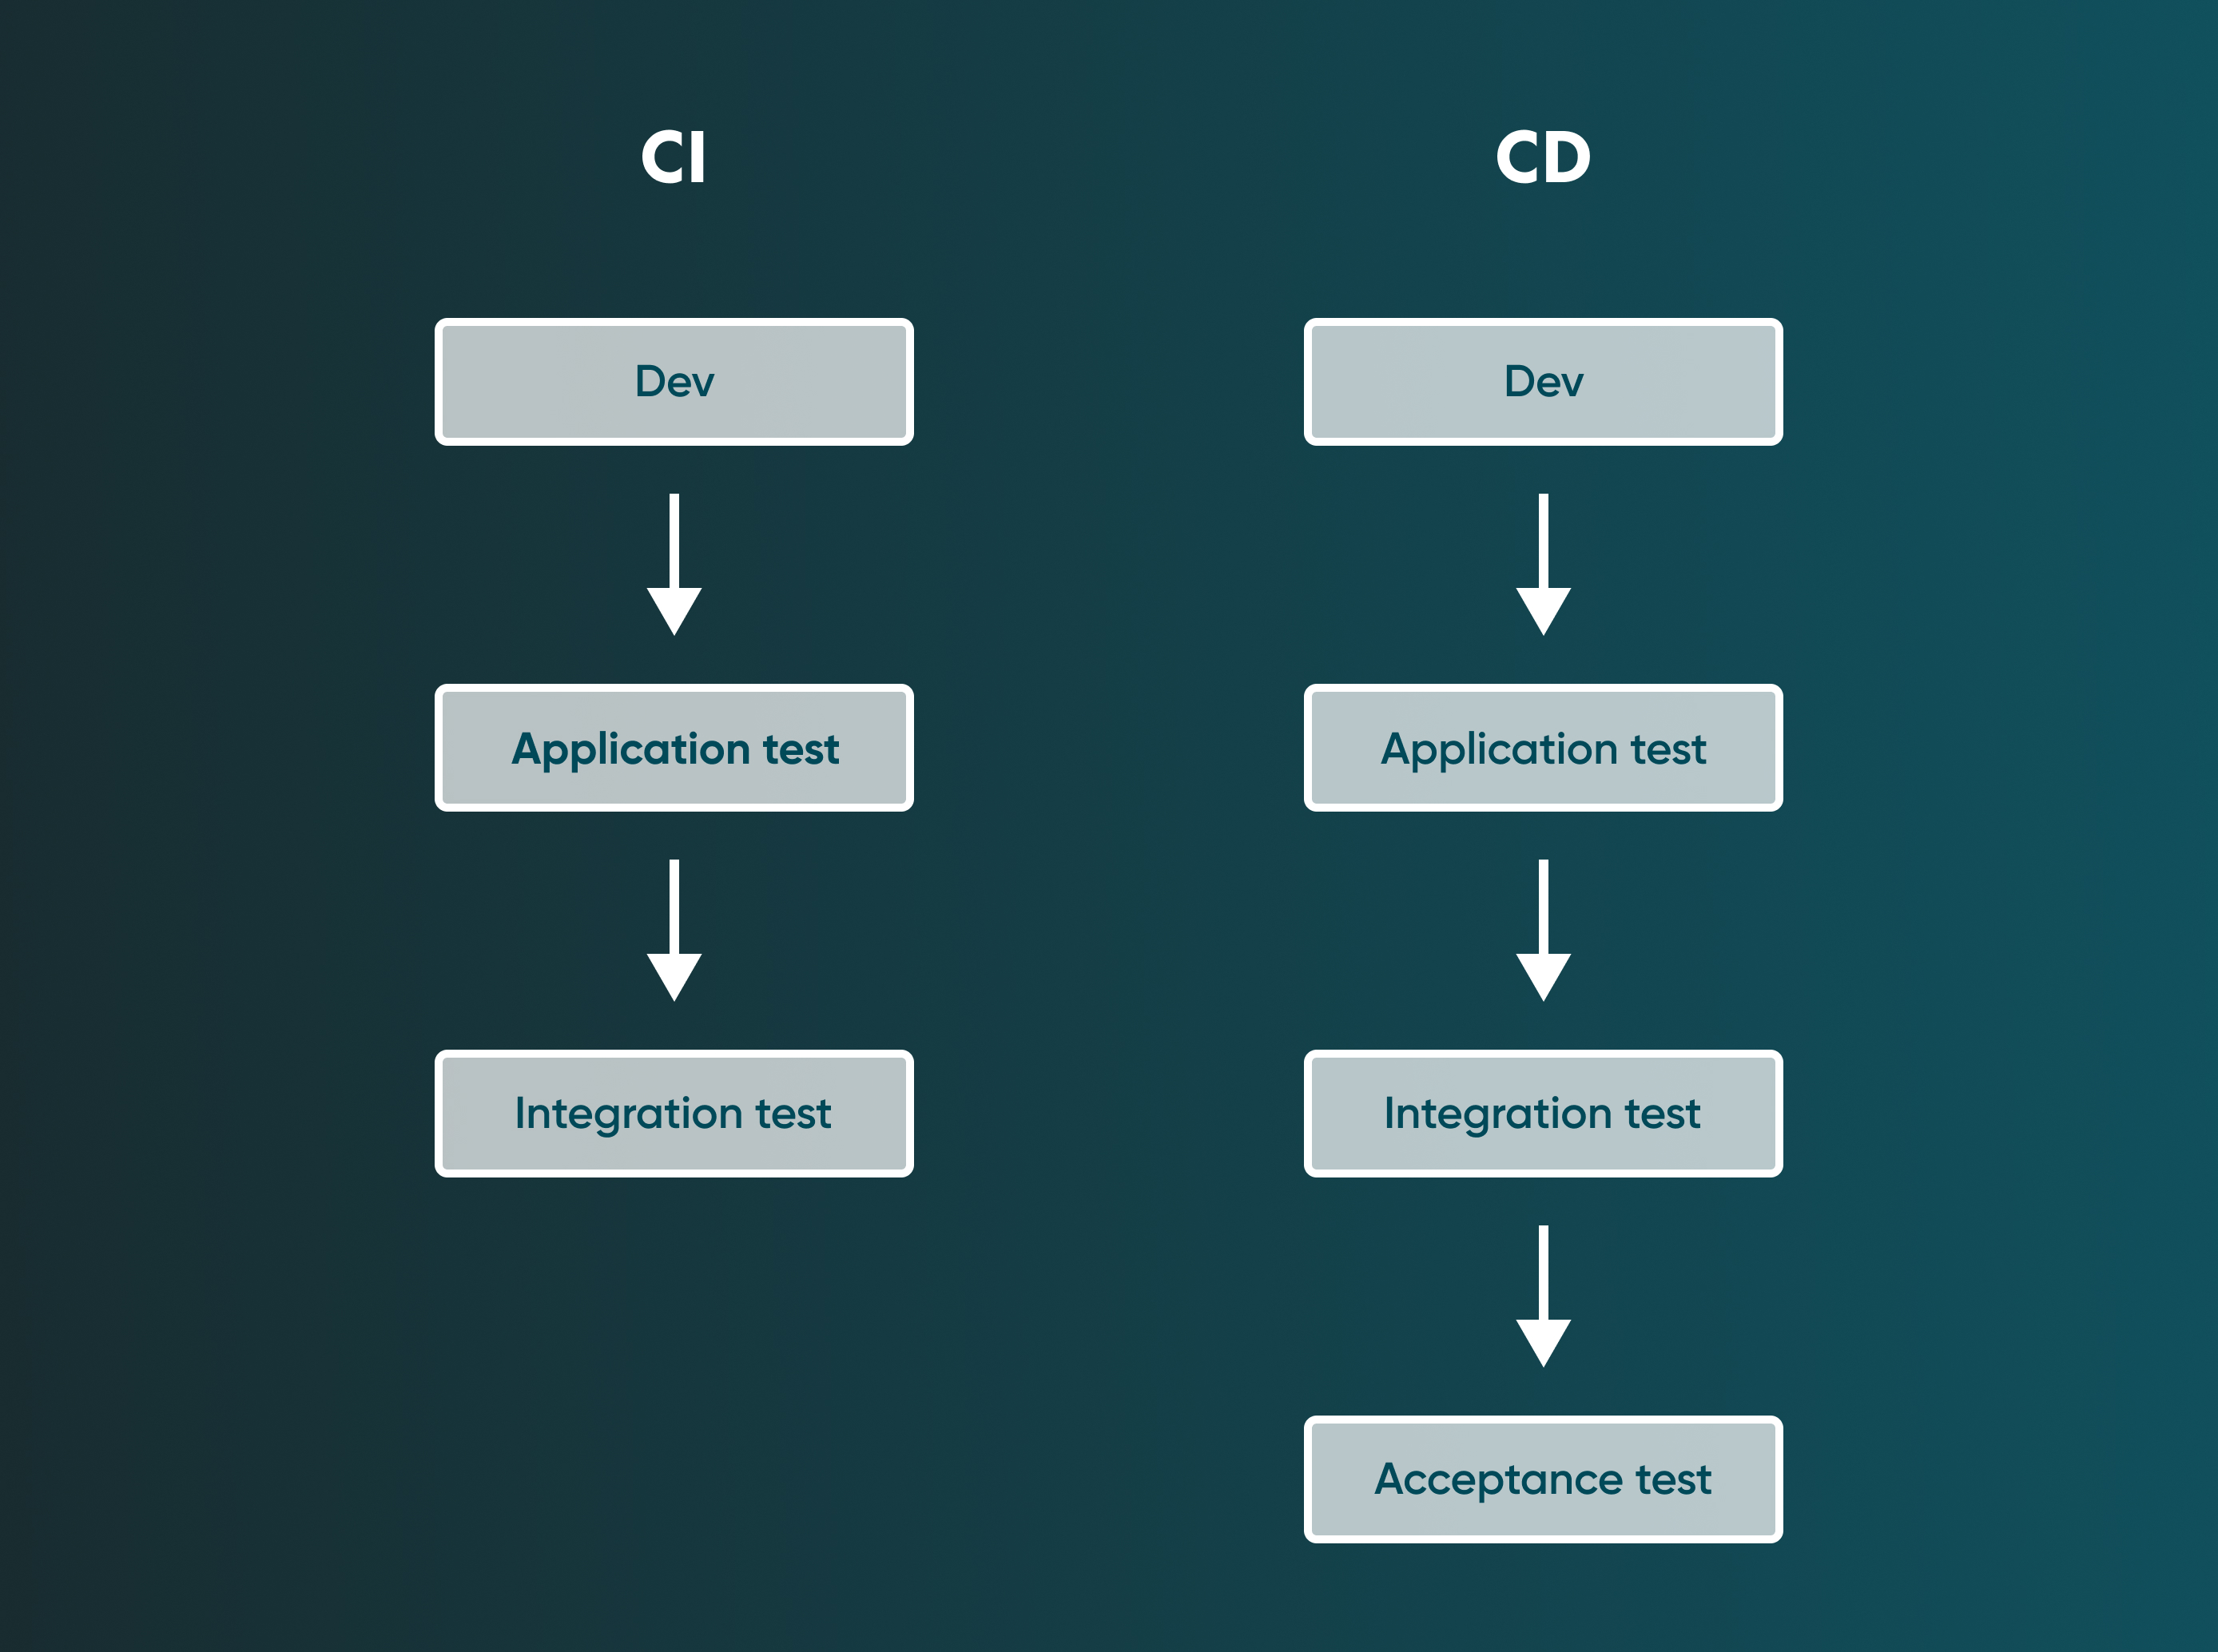 Even though CI and CD processes have a lot in common, one step still makes the difference. It's an Acceptance test that usually isn't performed during Continuous Integration.